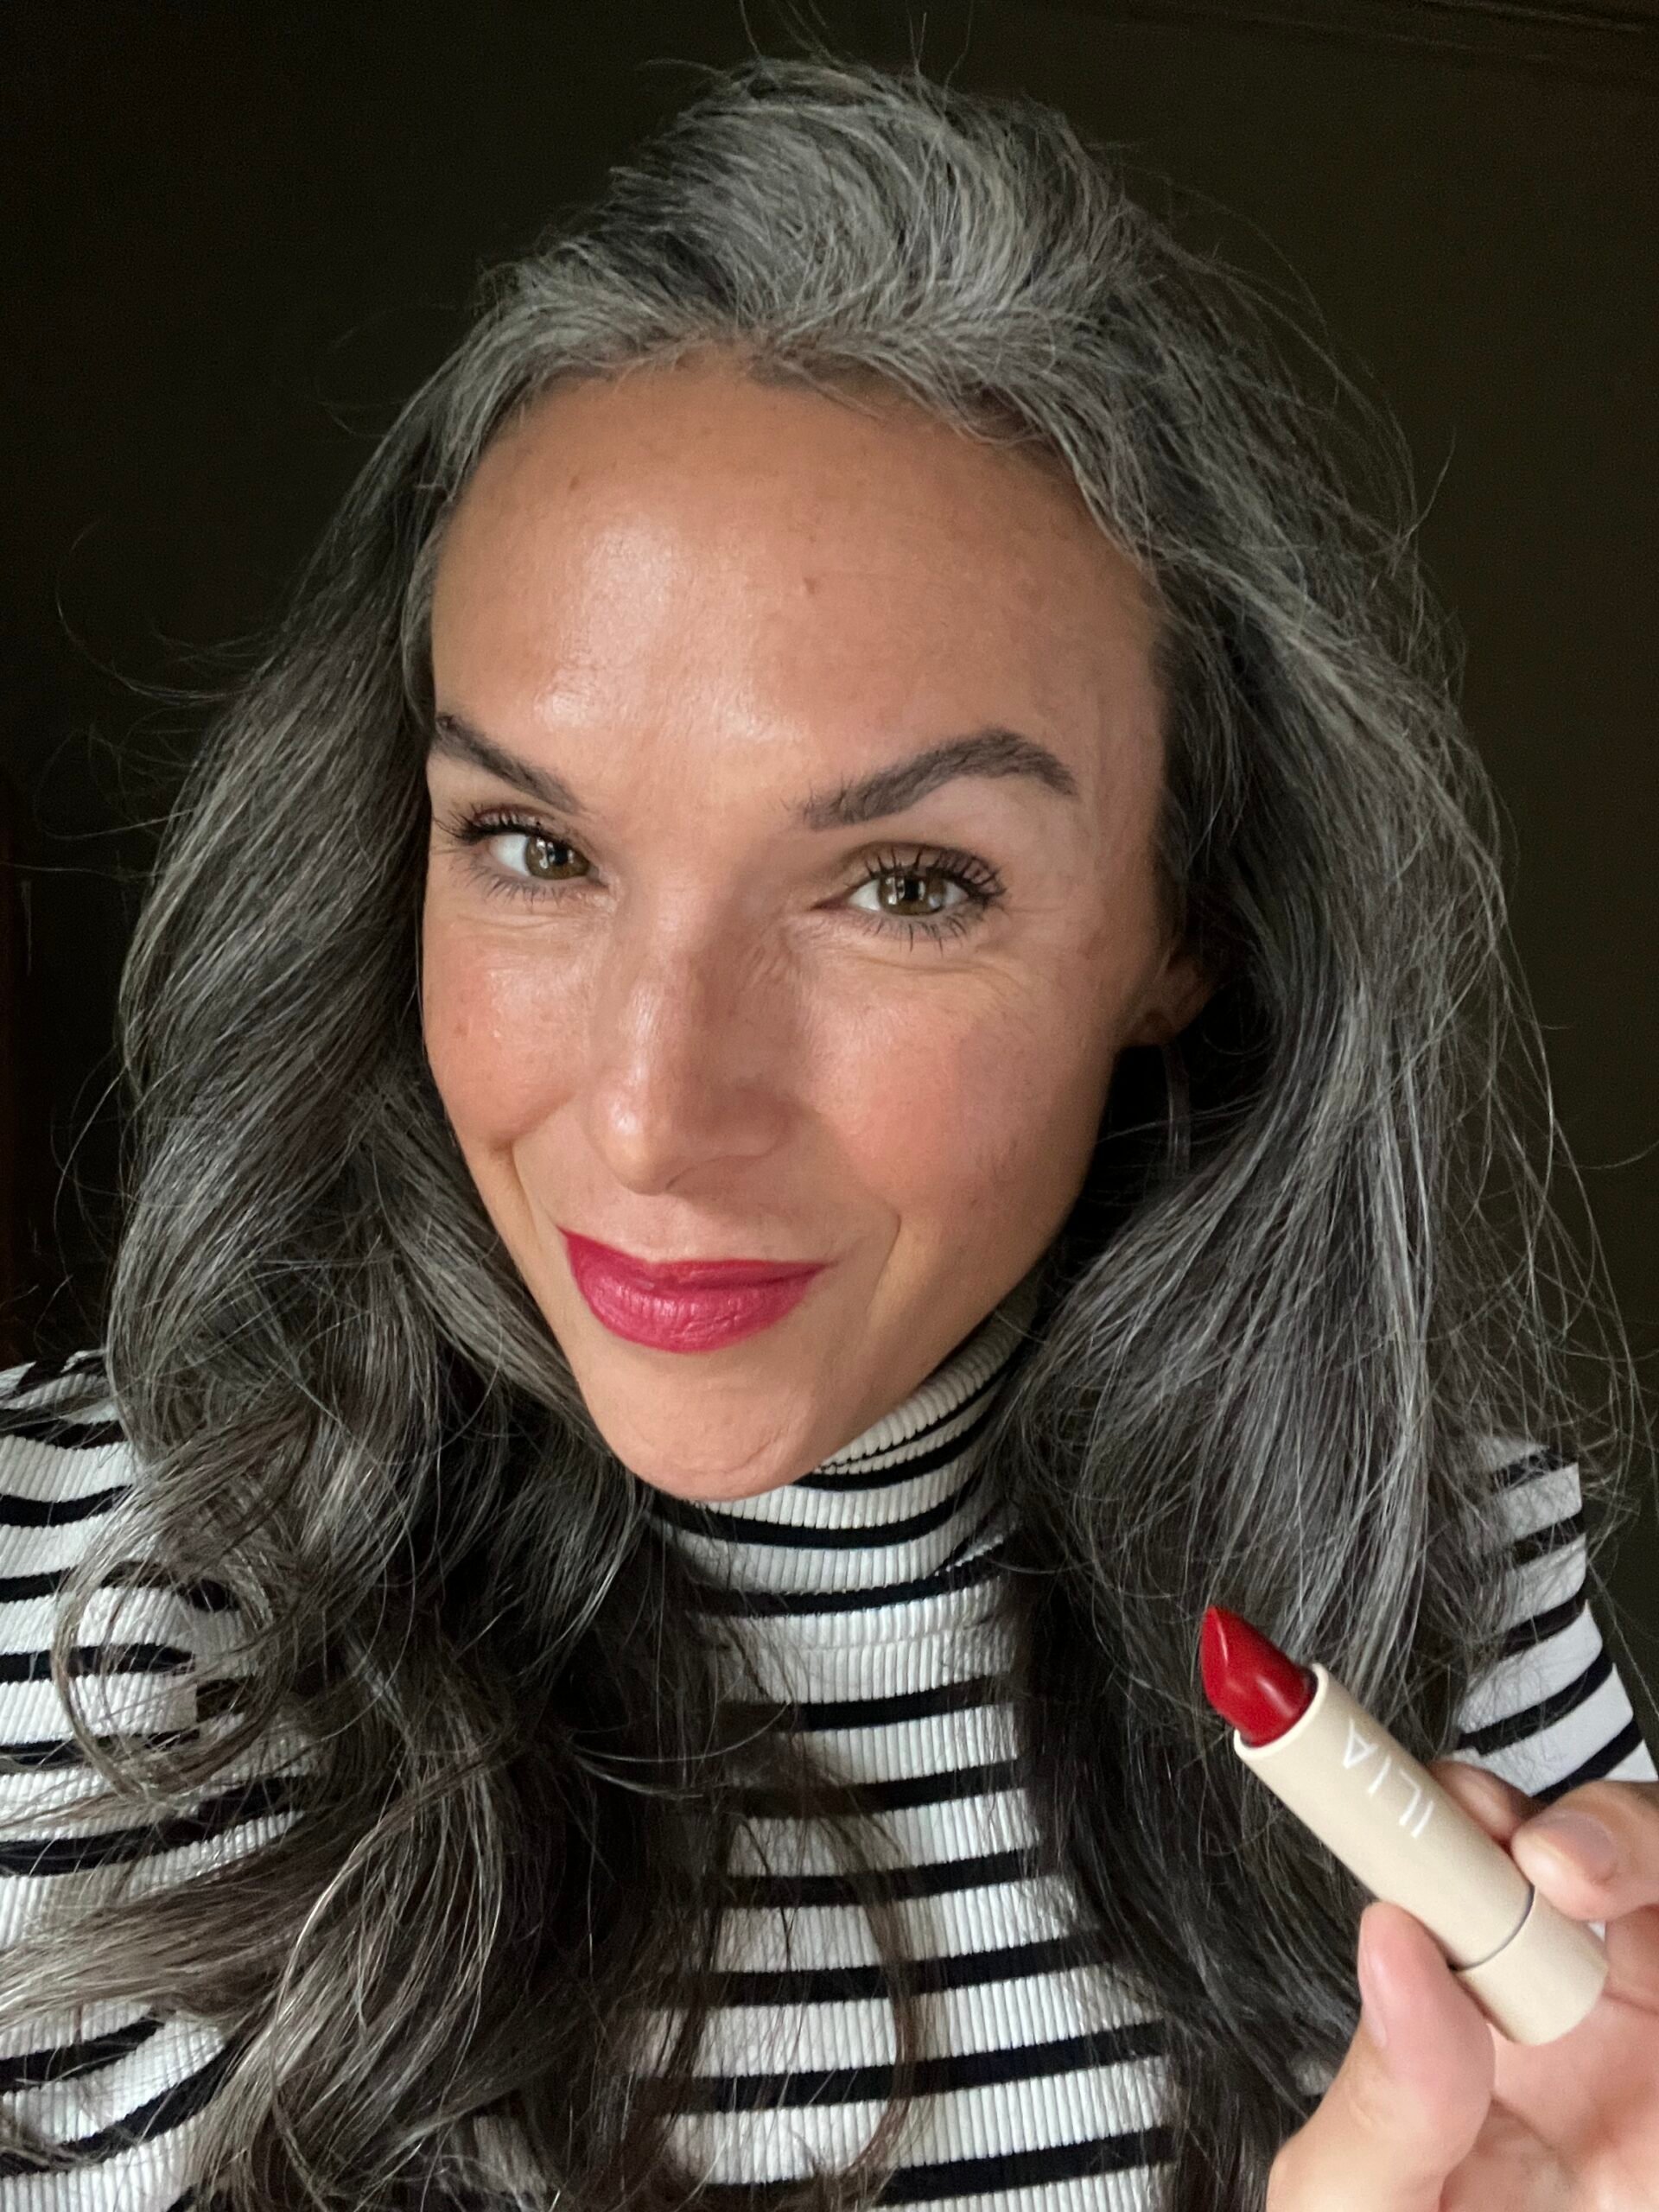 ILIA Color Block Lipstick in True Red on a woman's lips as she holds up the tube.